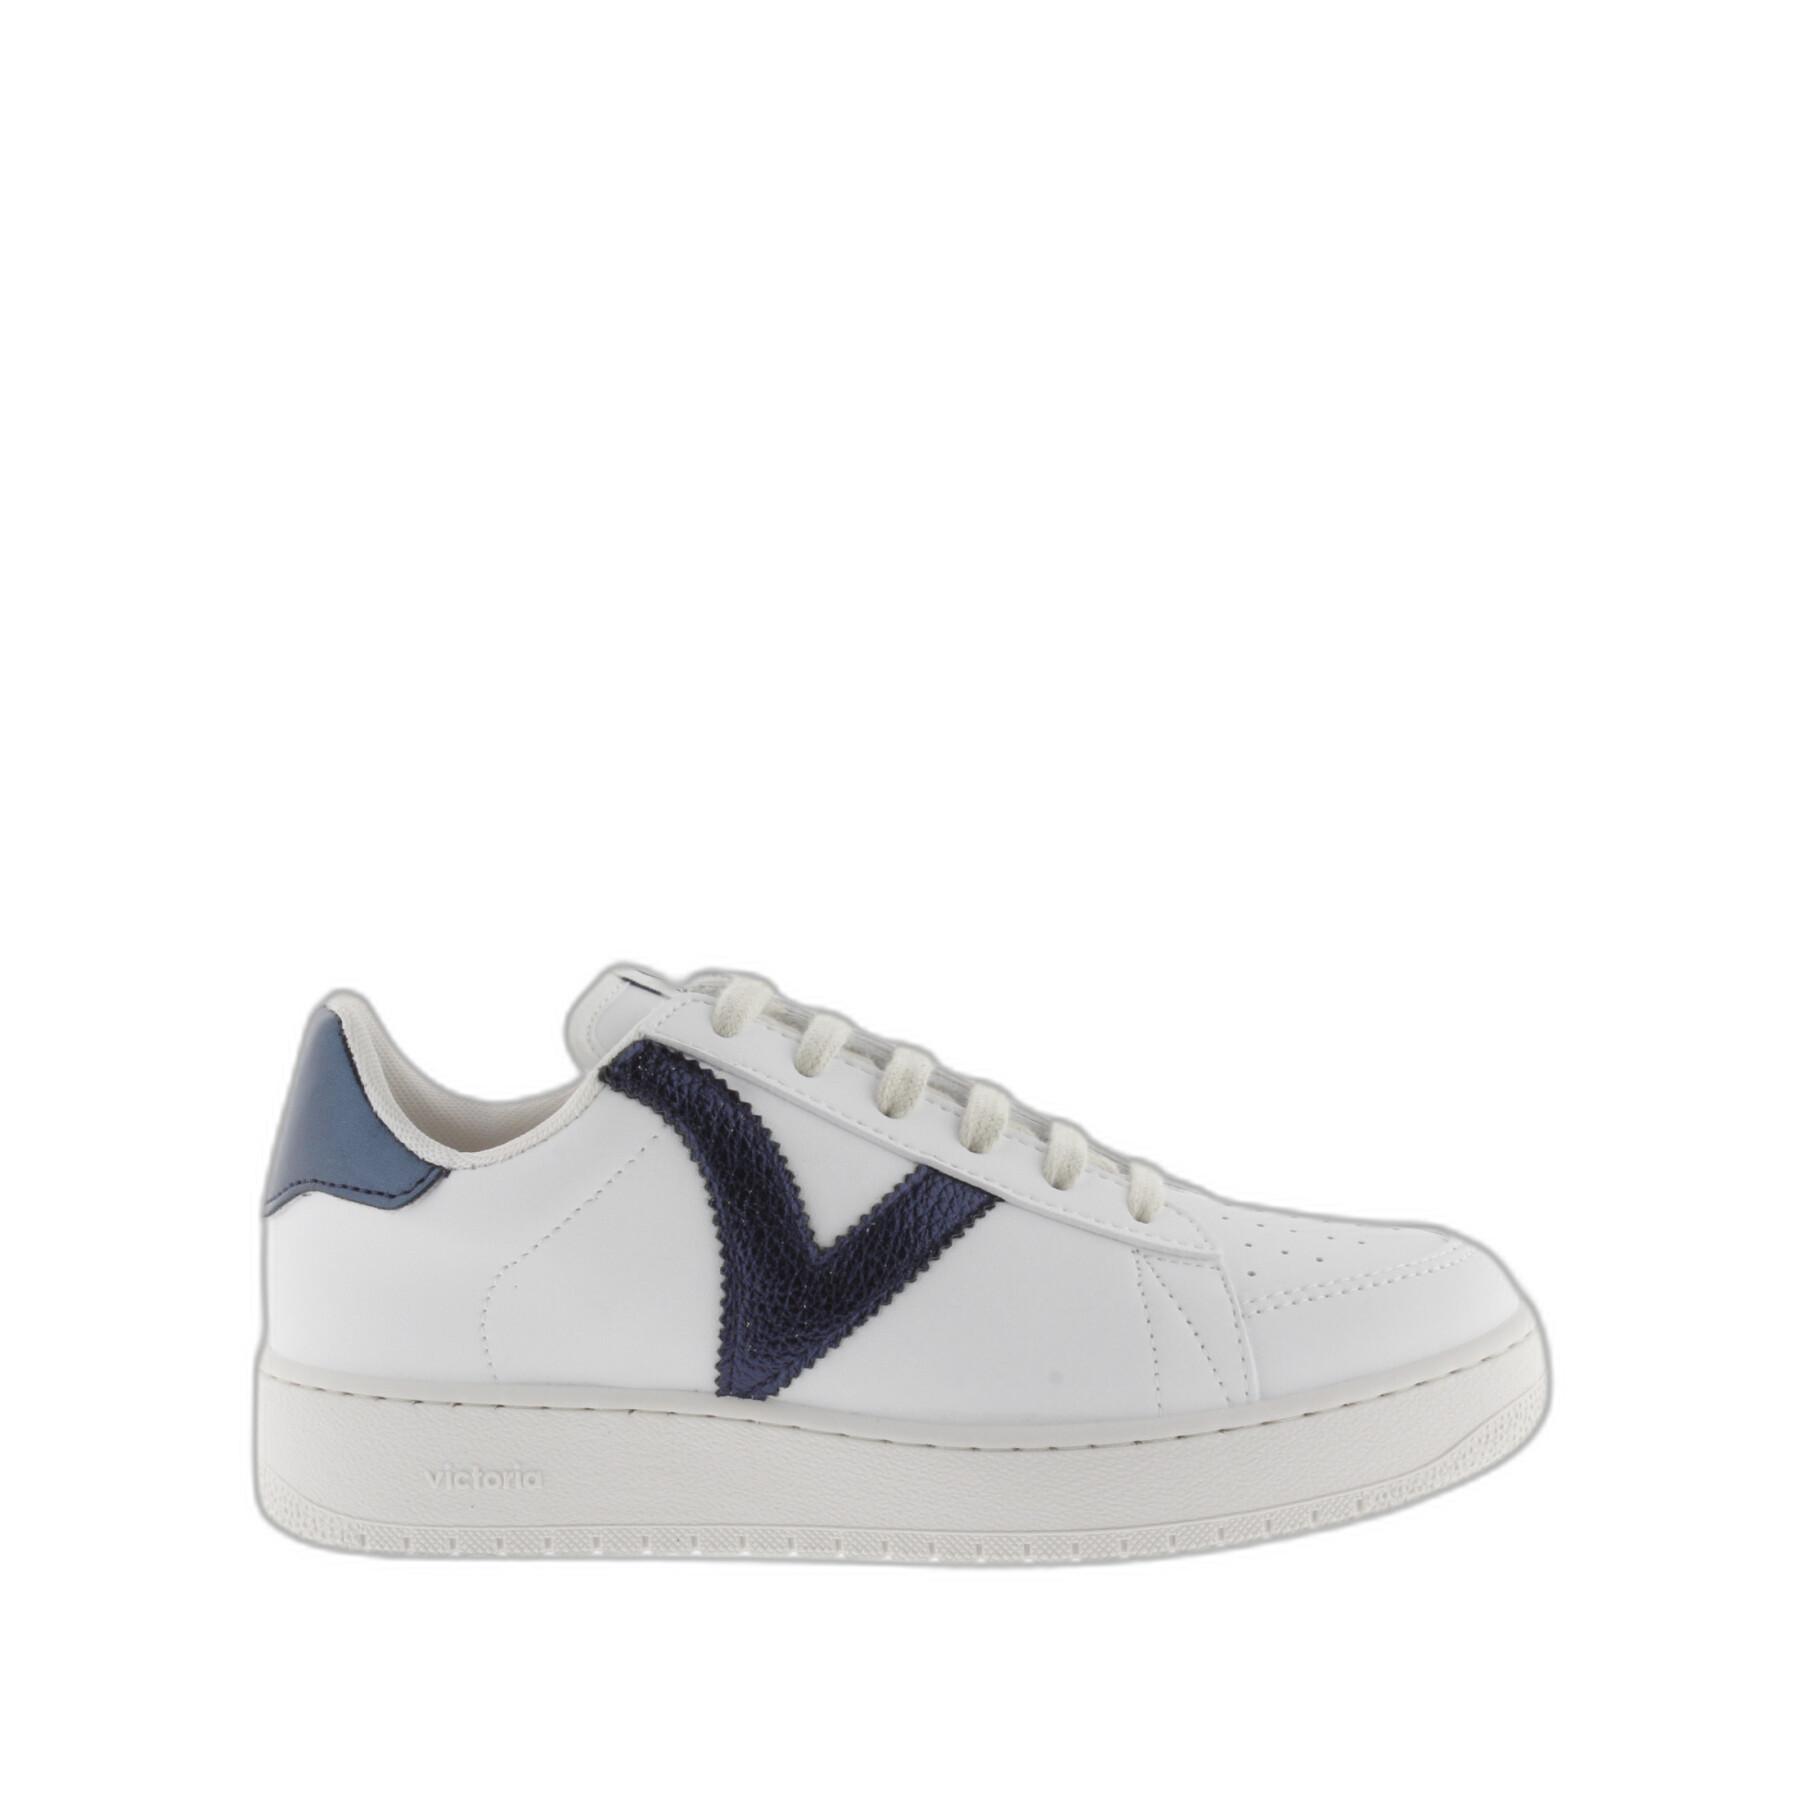 Women's faux leather sneakers Victoria Madrid